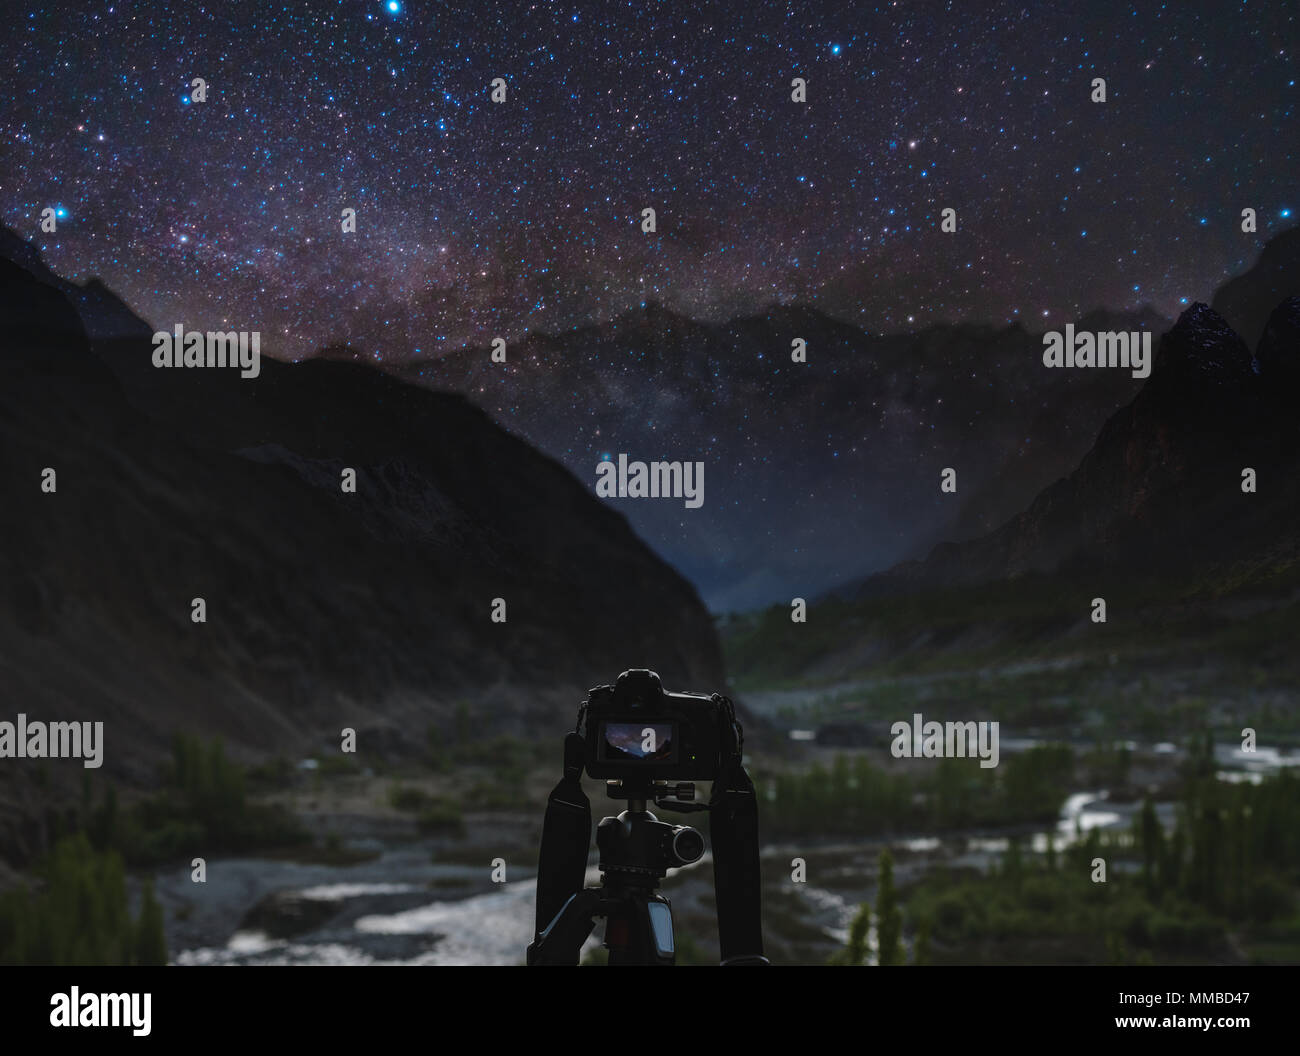 Taking night photography by dslr camera, Night sky full of stars and milky way with silhouette mountains valley Stock Photo